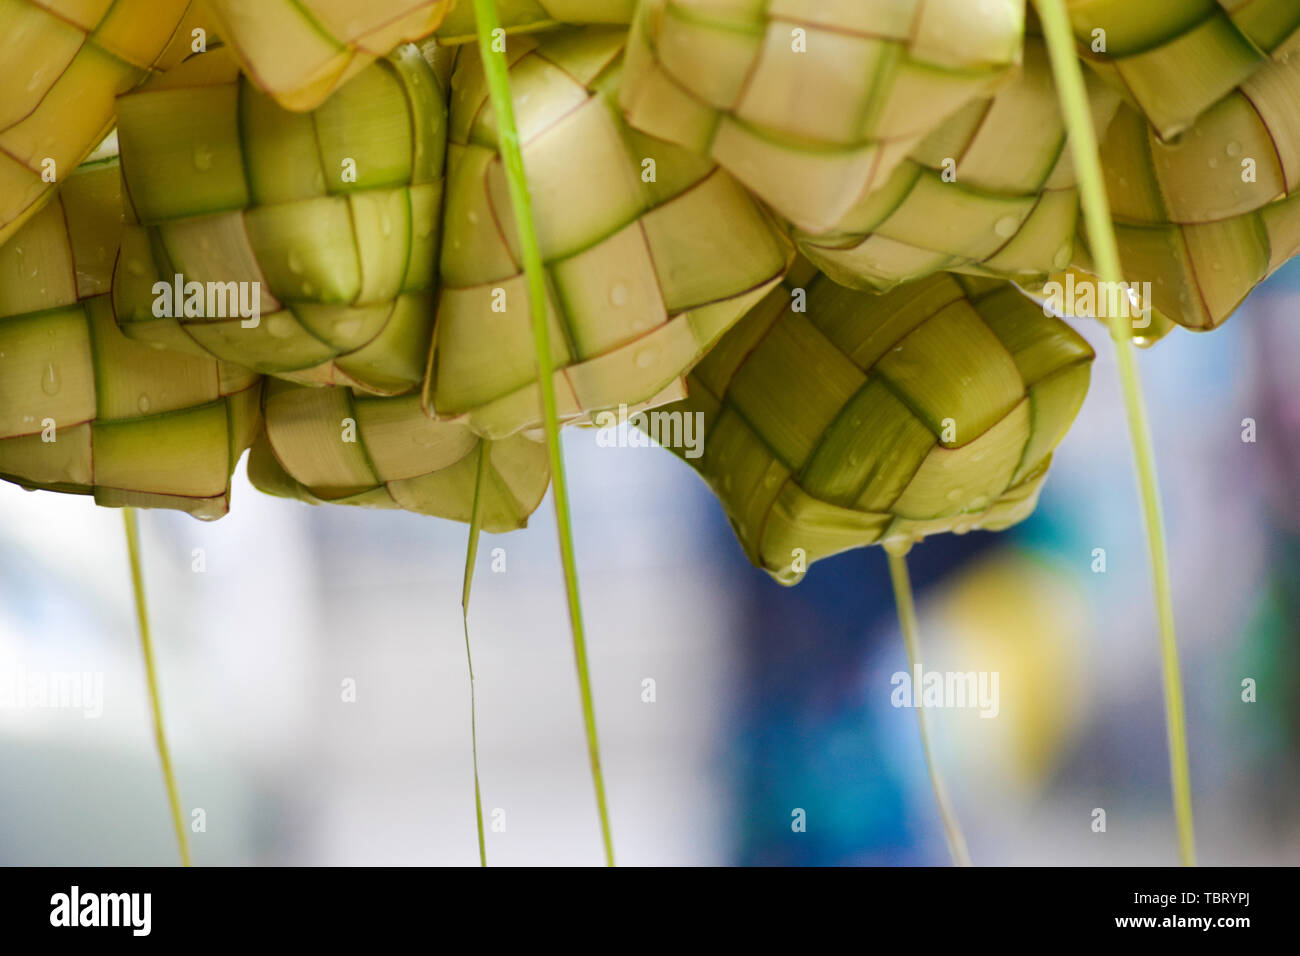 Ketupat 'asian rice dumpling'. Ketupat is a natural rice casing made from young coconut leaves for cooking rice during eid Mubarak Eid ul Fitr Stock Photo